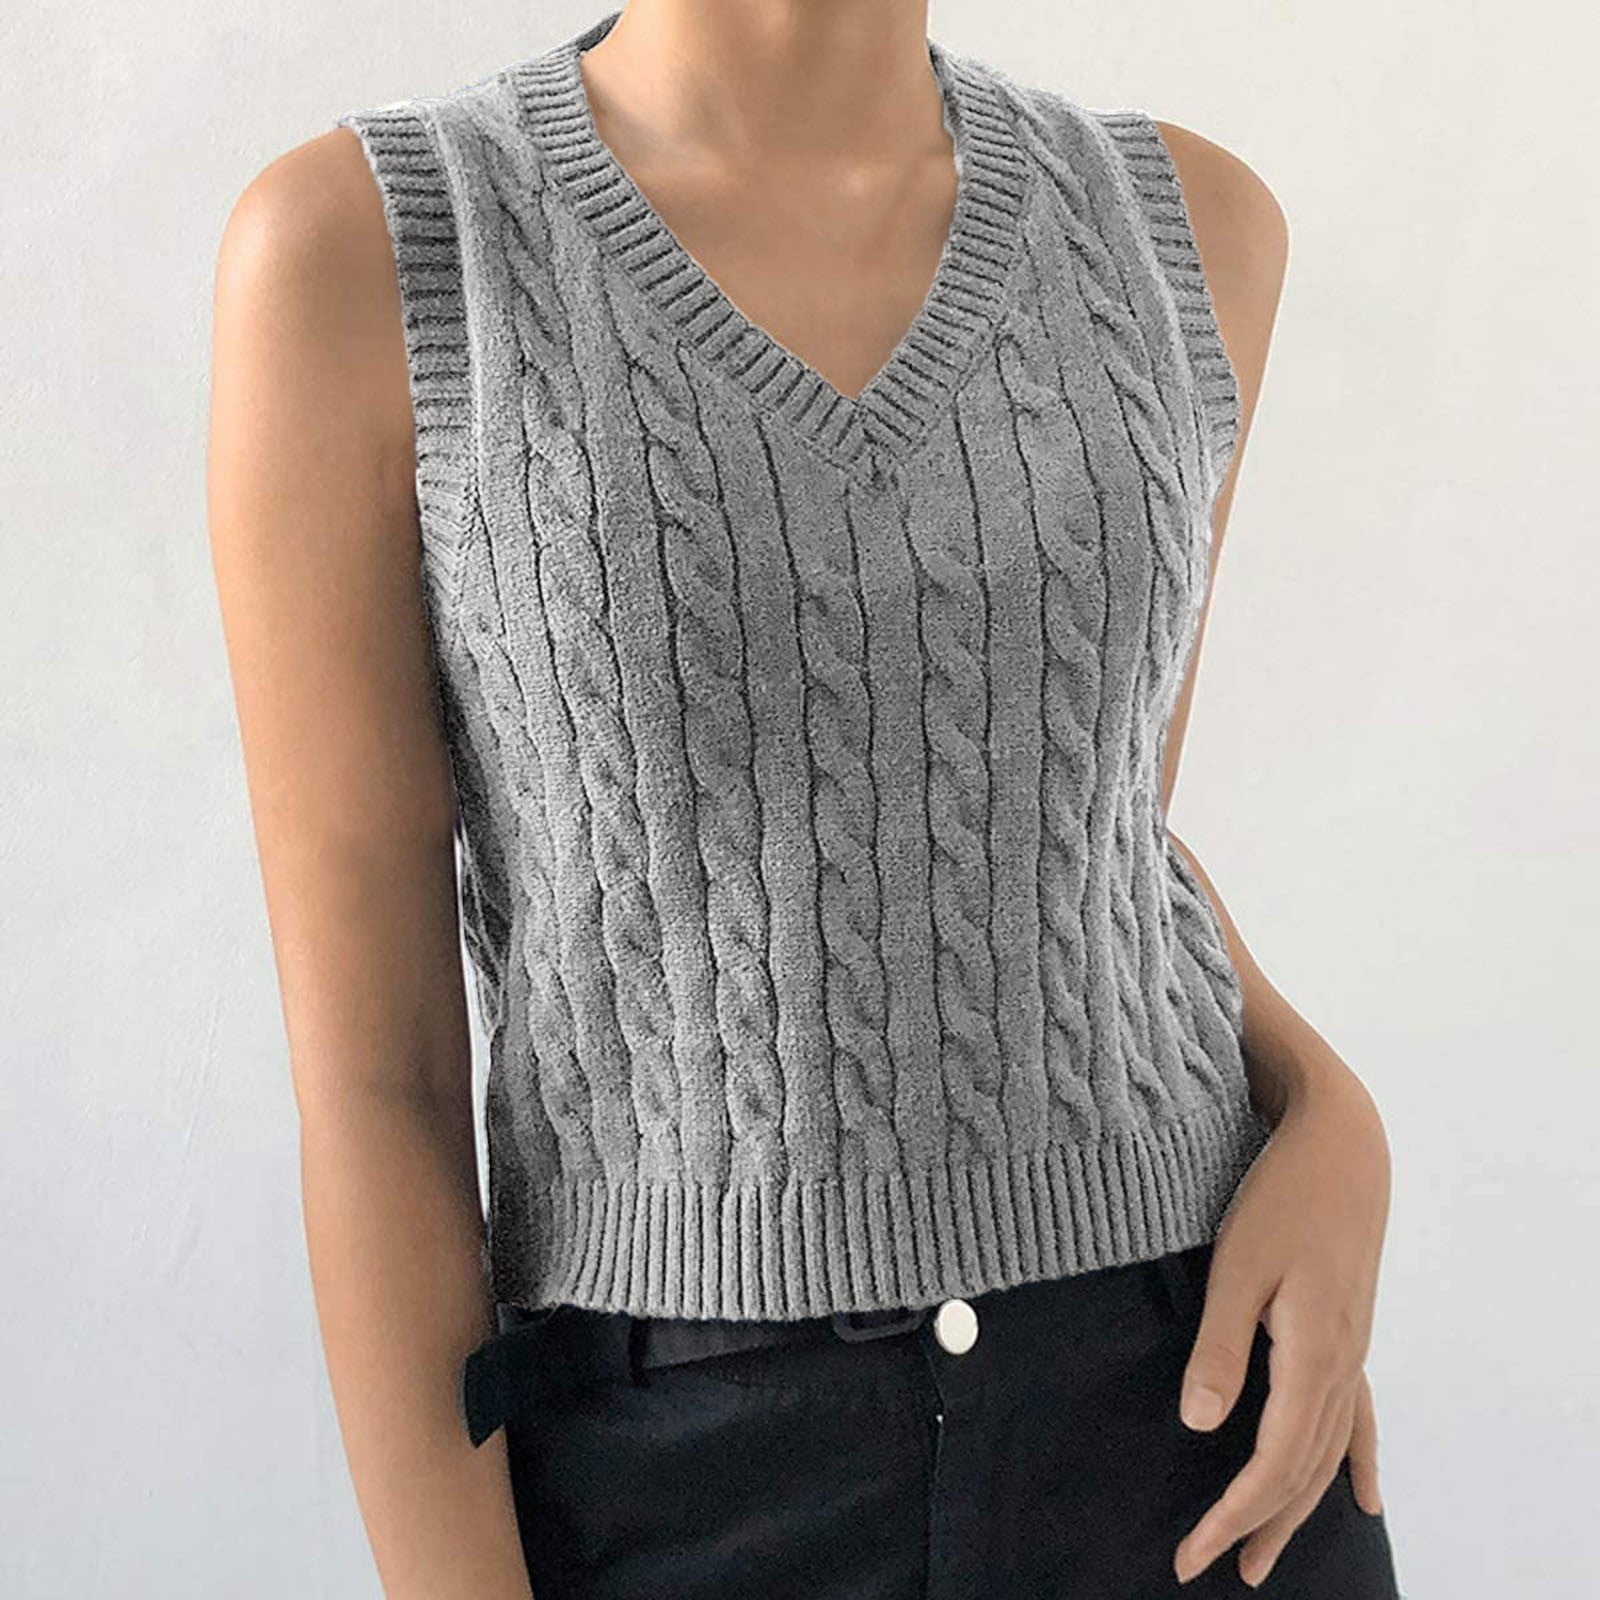 ZQGJB Womens Oversized Sweater Vest Casual Solid Color V Neck 